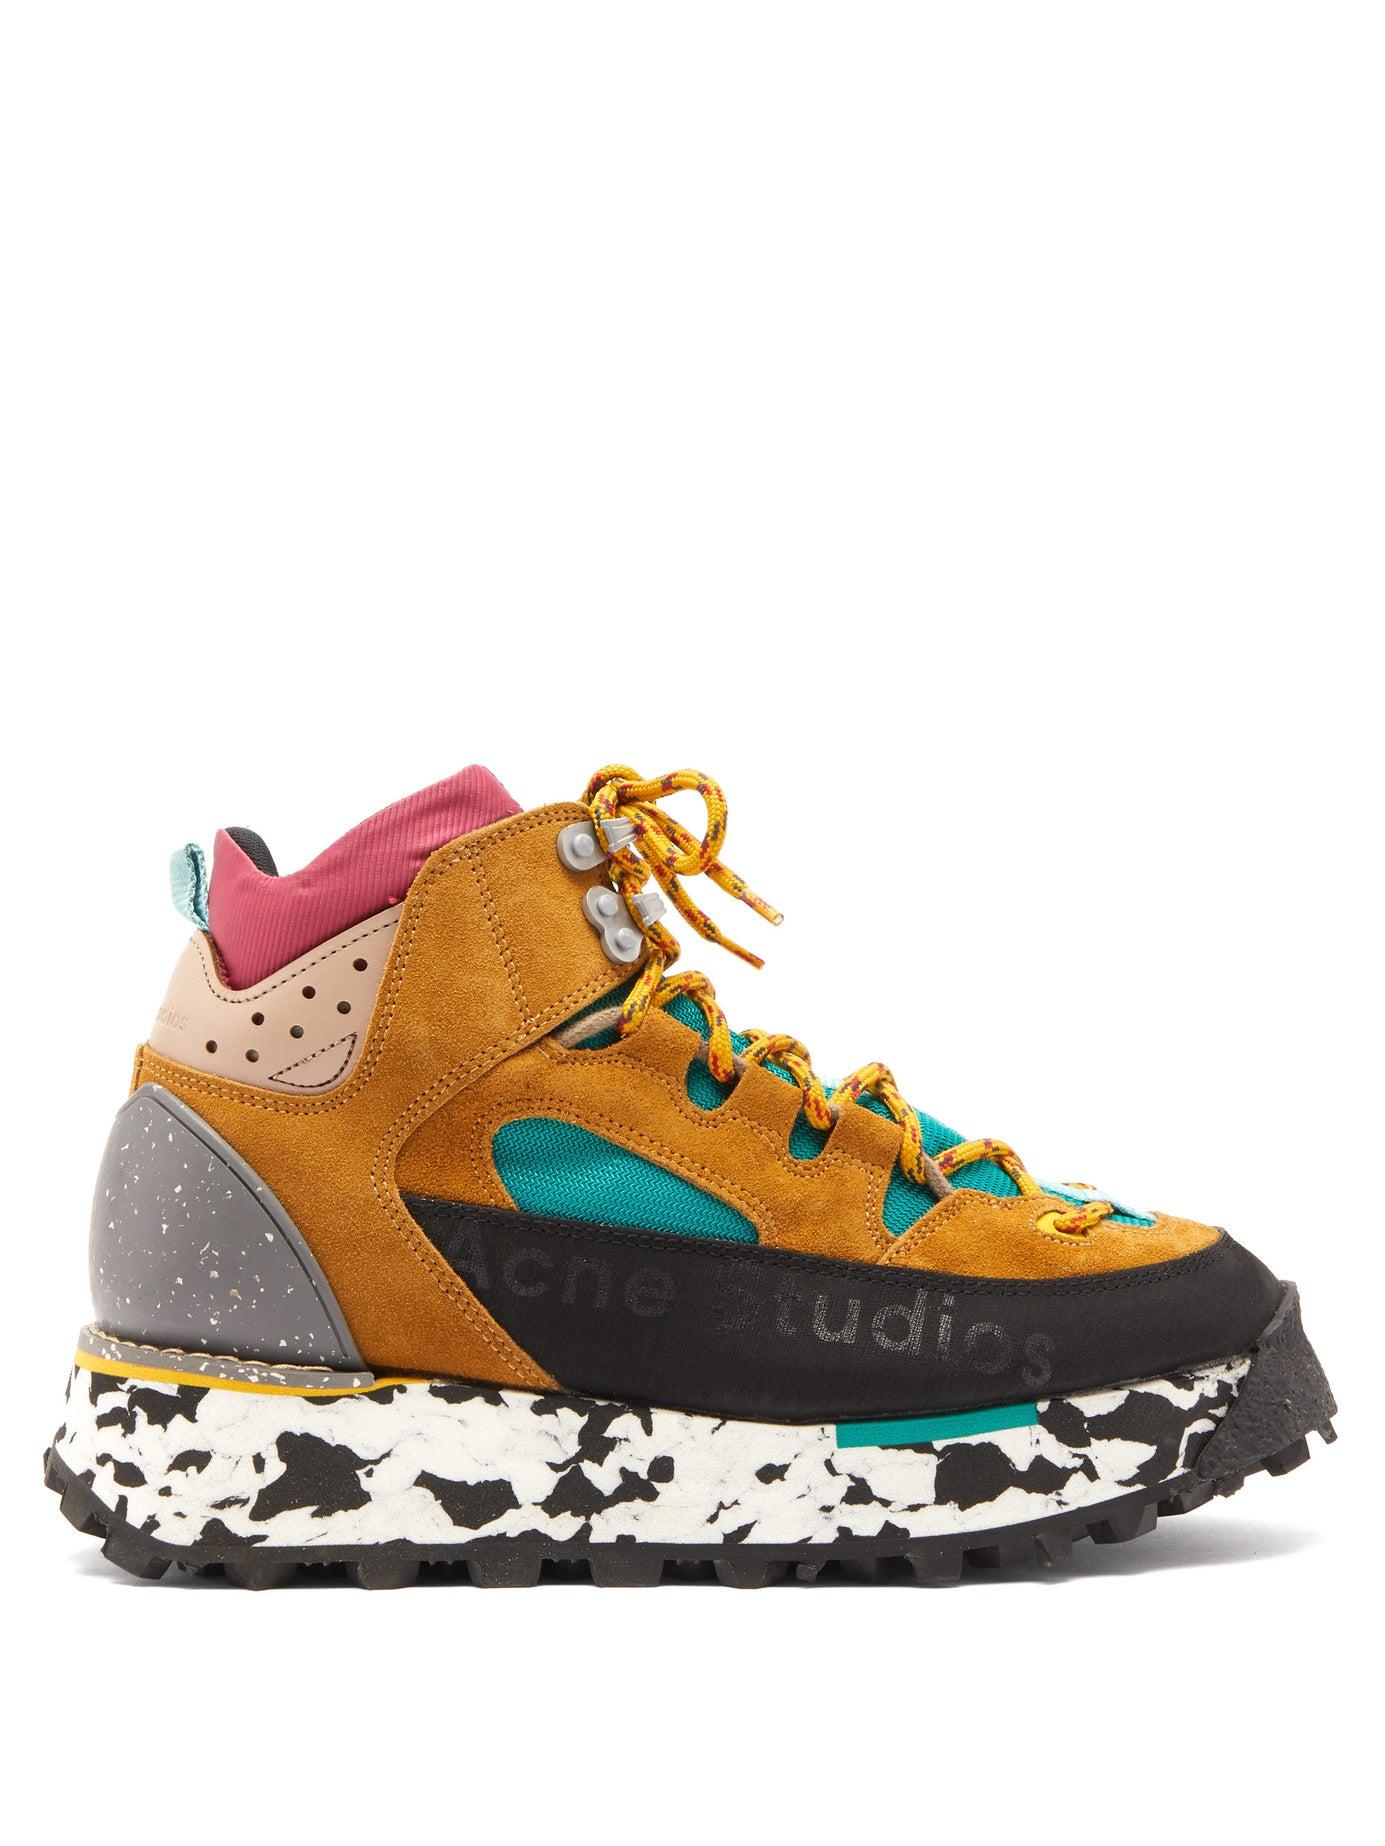 Acne Studios Bertrand Canvas And Suede Hiking Boots | Lyst